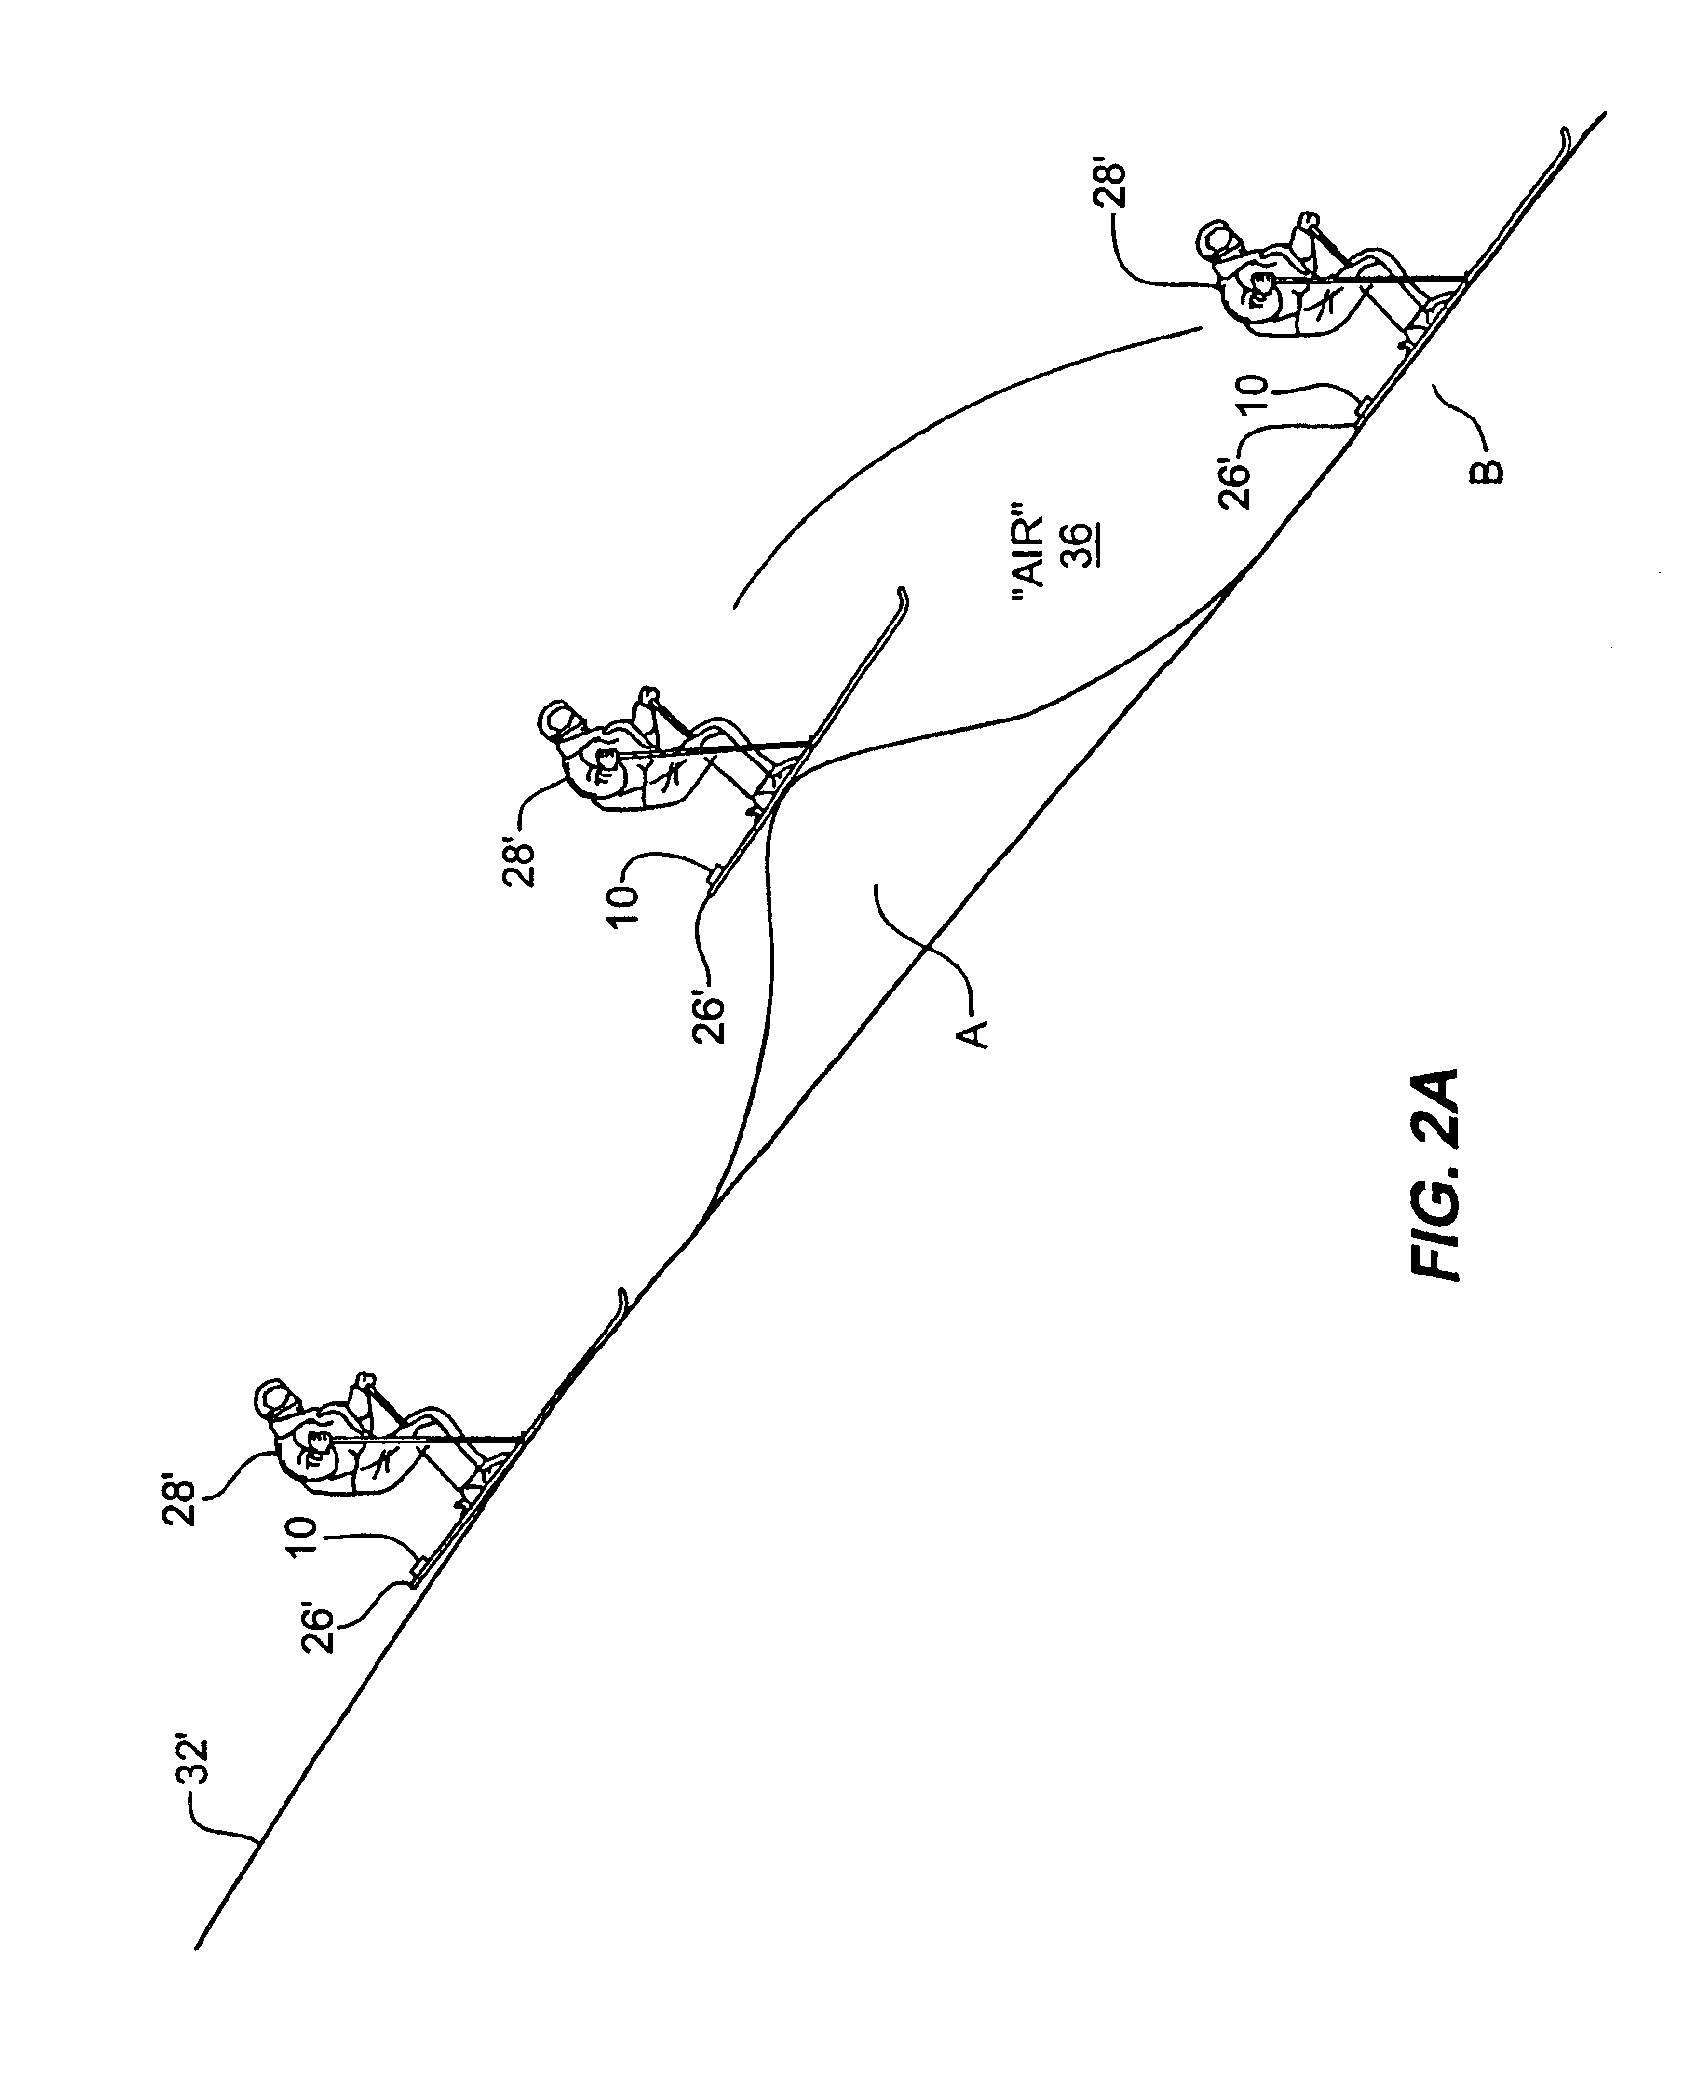 Sport monitoring systems and associated methods